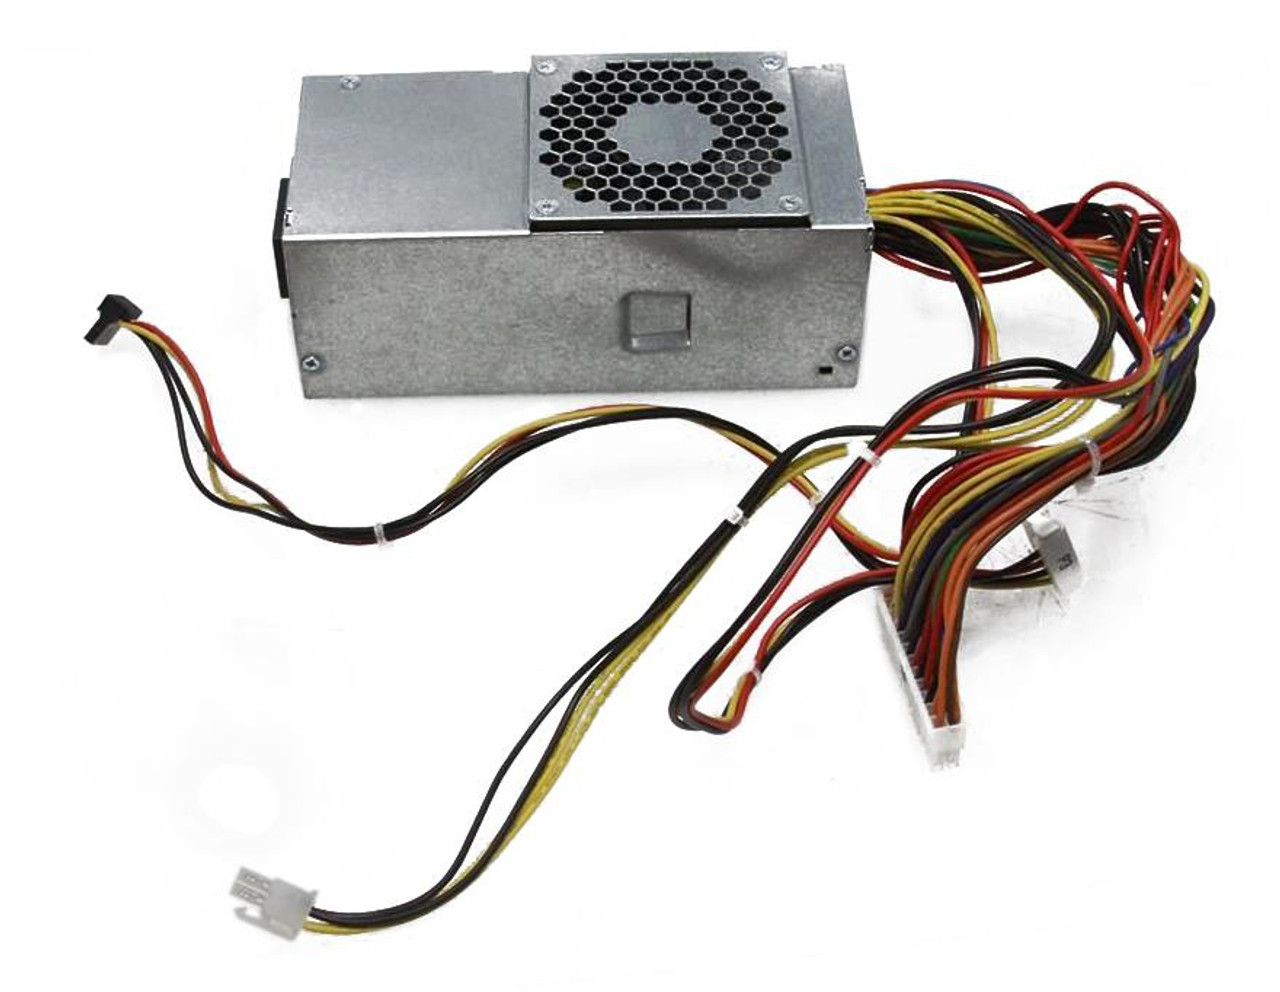 PS-5181-02 Lenovo 180-Watts Power Supply for ThinkCentre A70